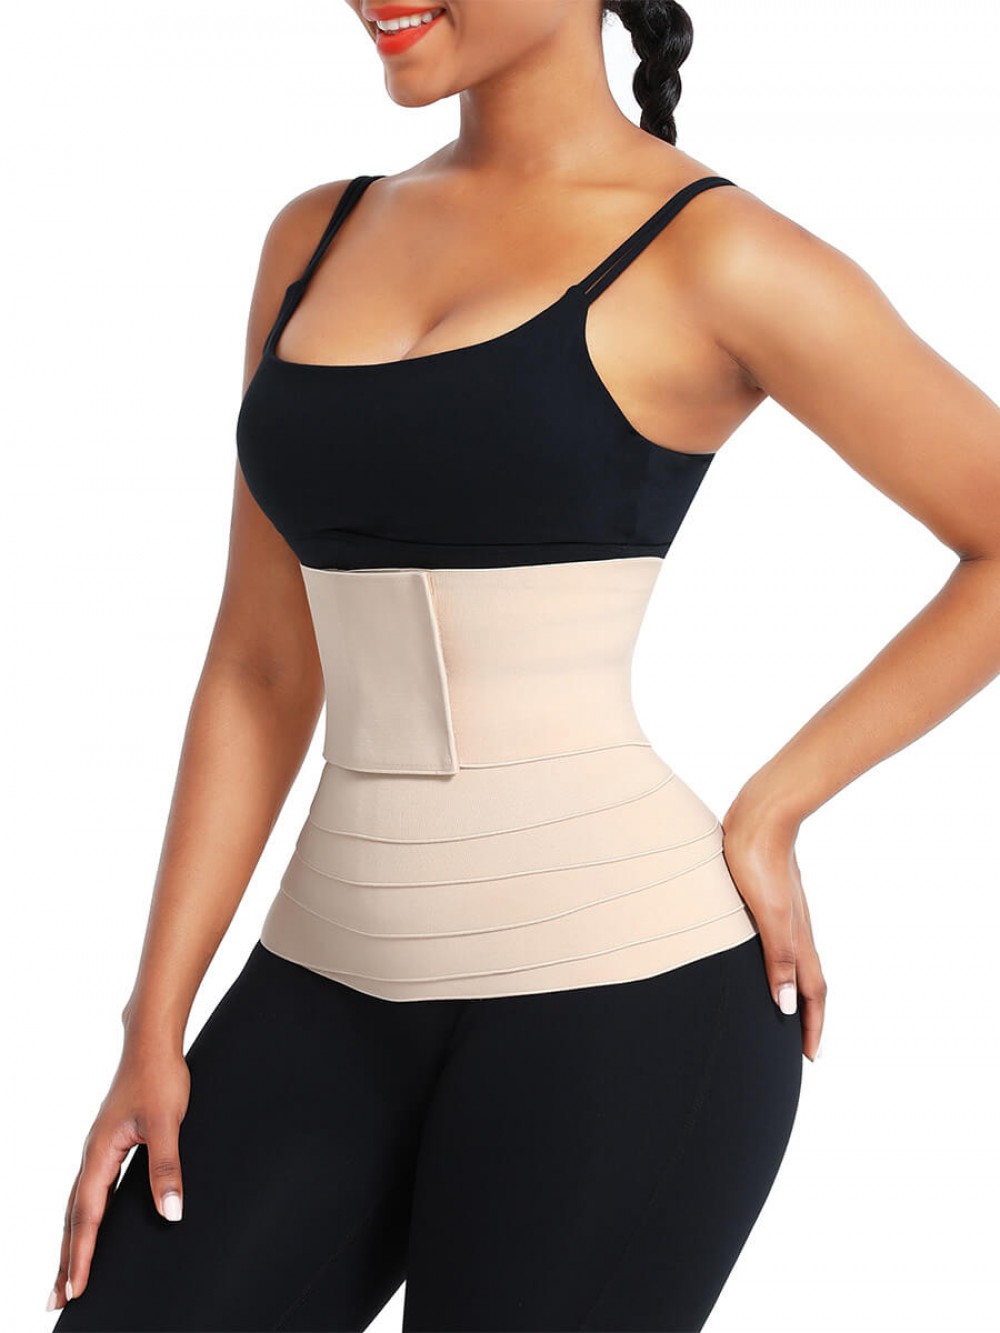 Nude Elasticity Knit Bandage Waist Wrap Waist Trainer For Lose Weight Belly Tummy Trimmer